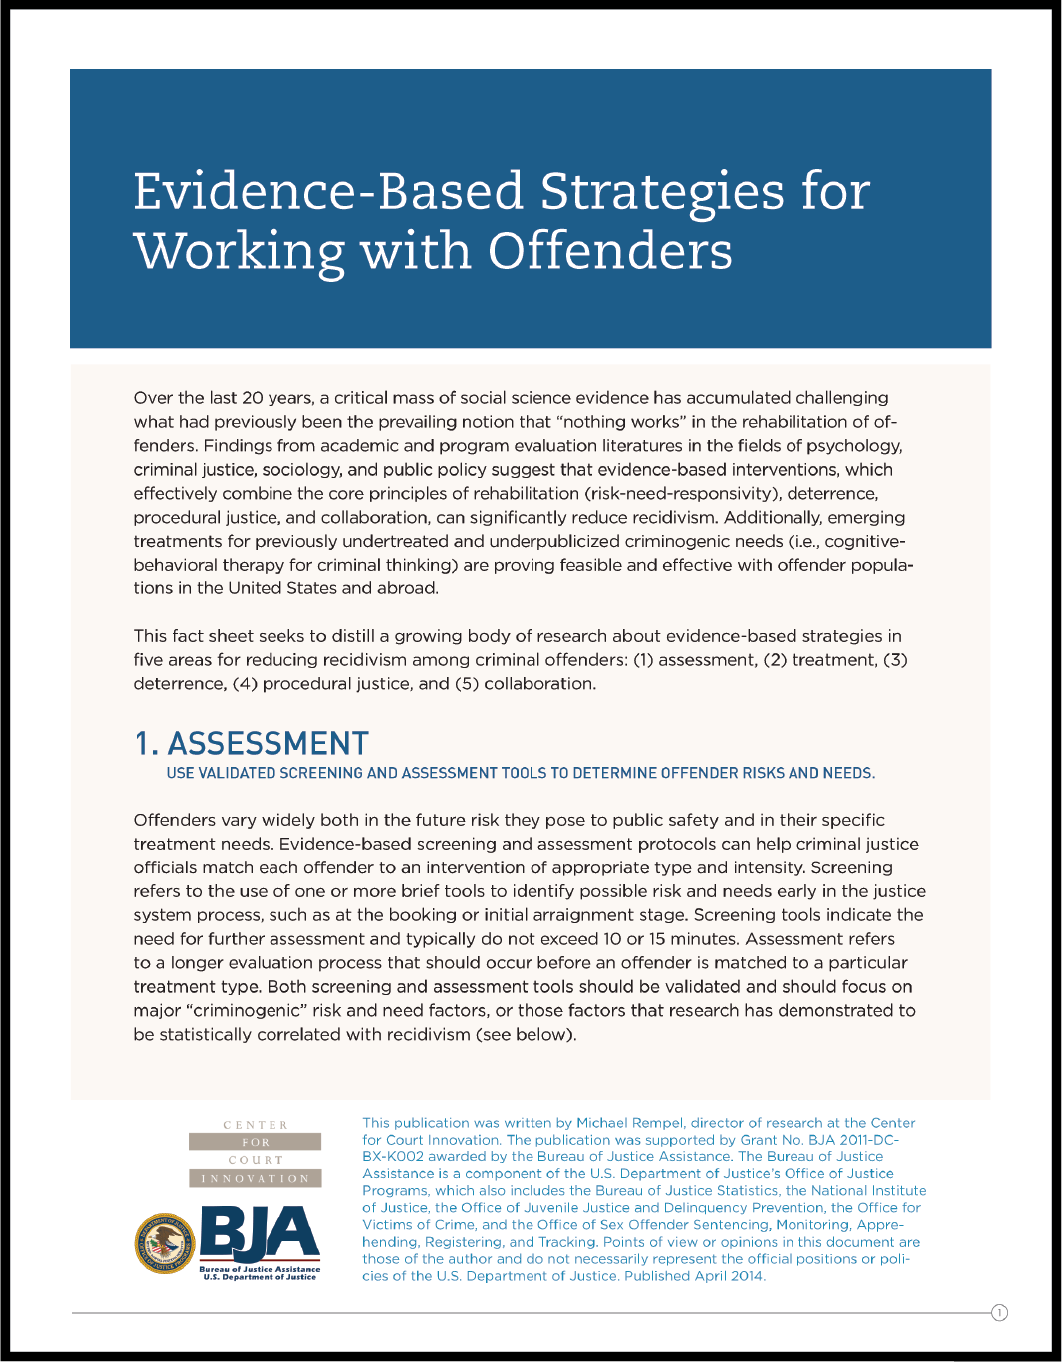 First page of document "Evidence-Based Strategies for Working with Offenders"